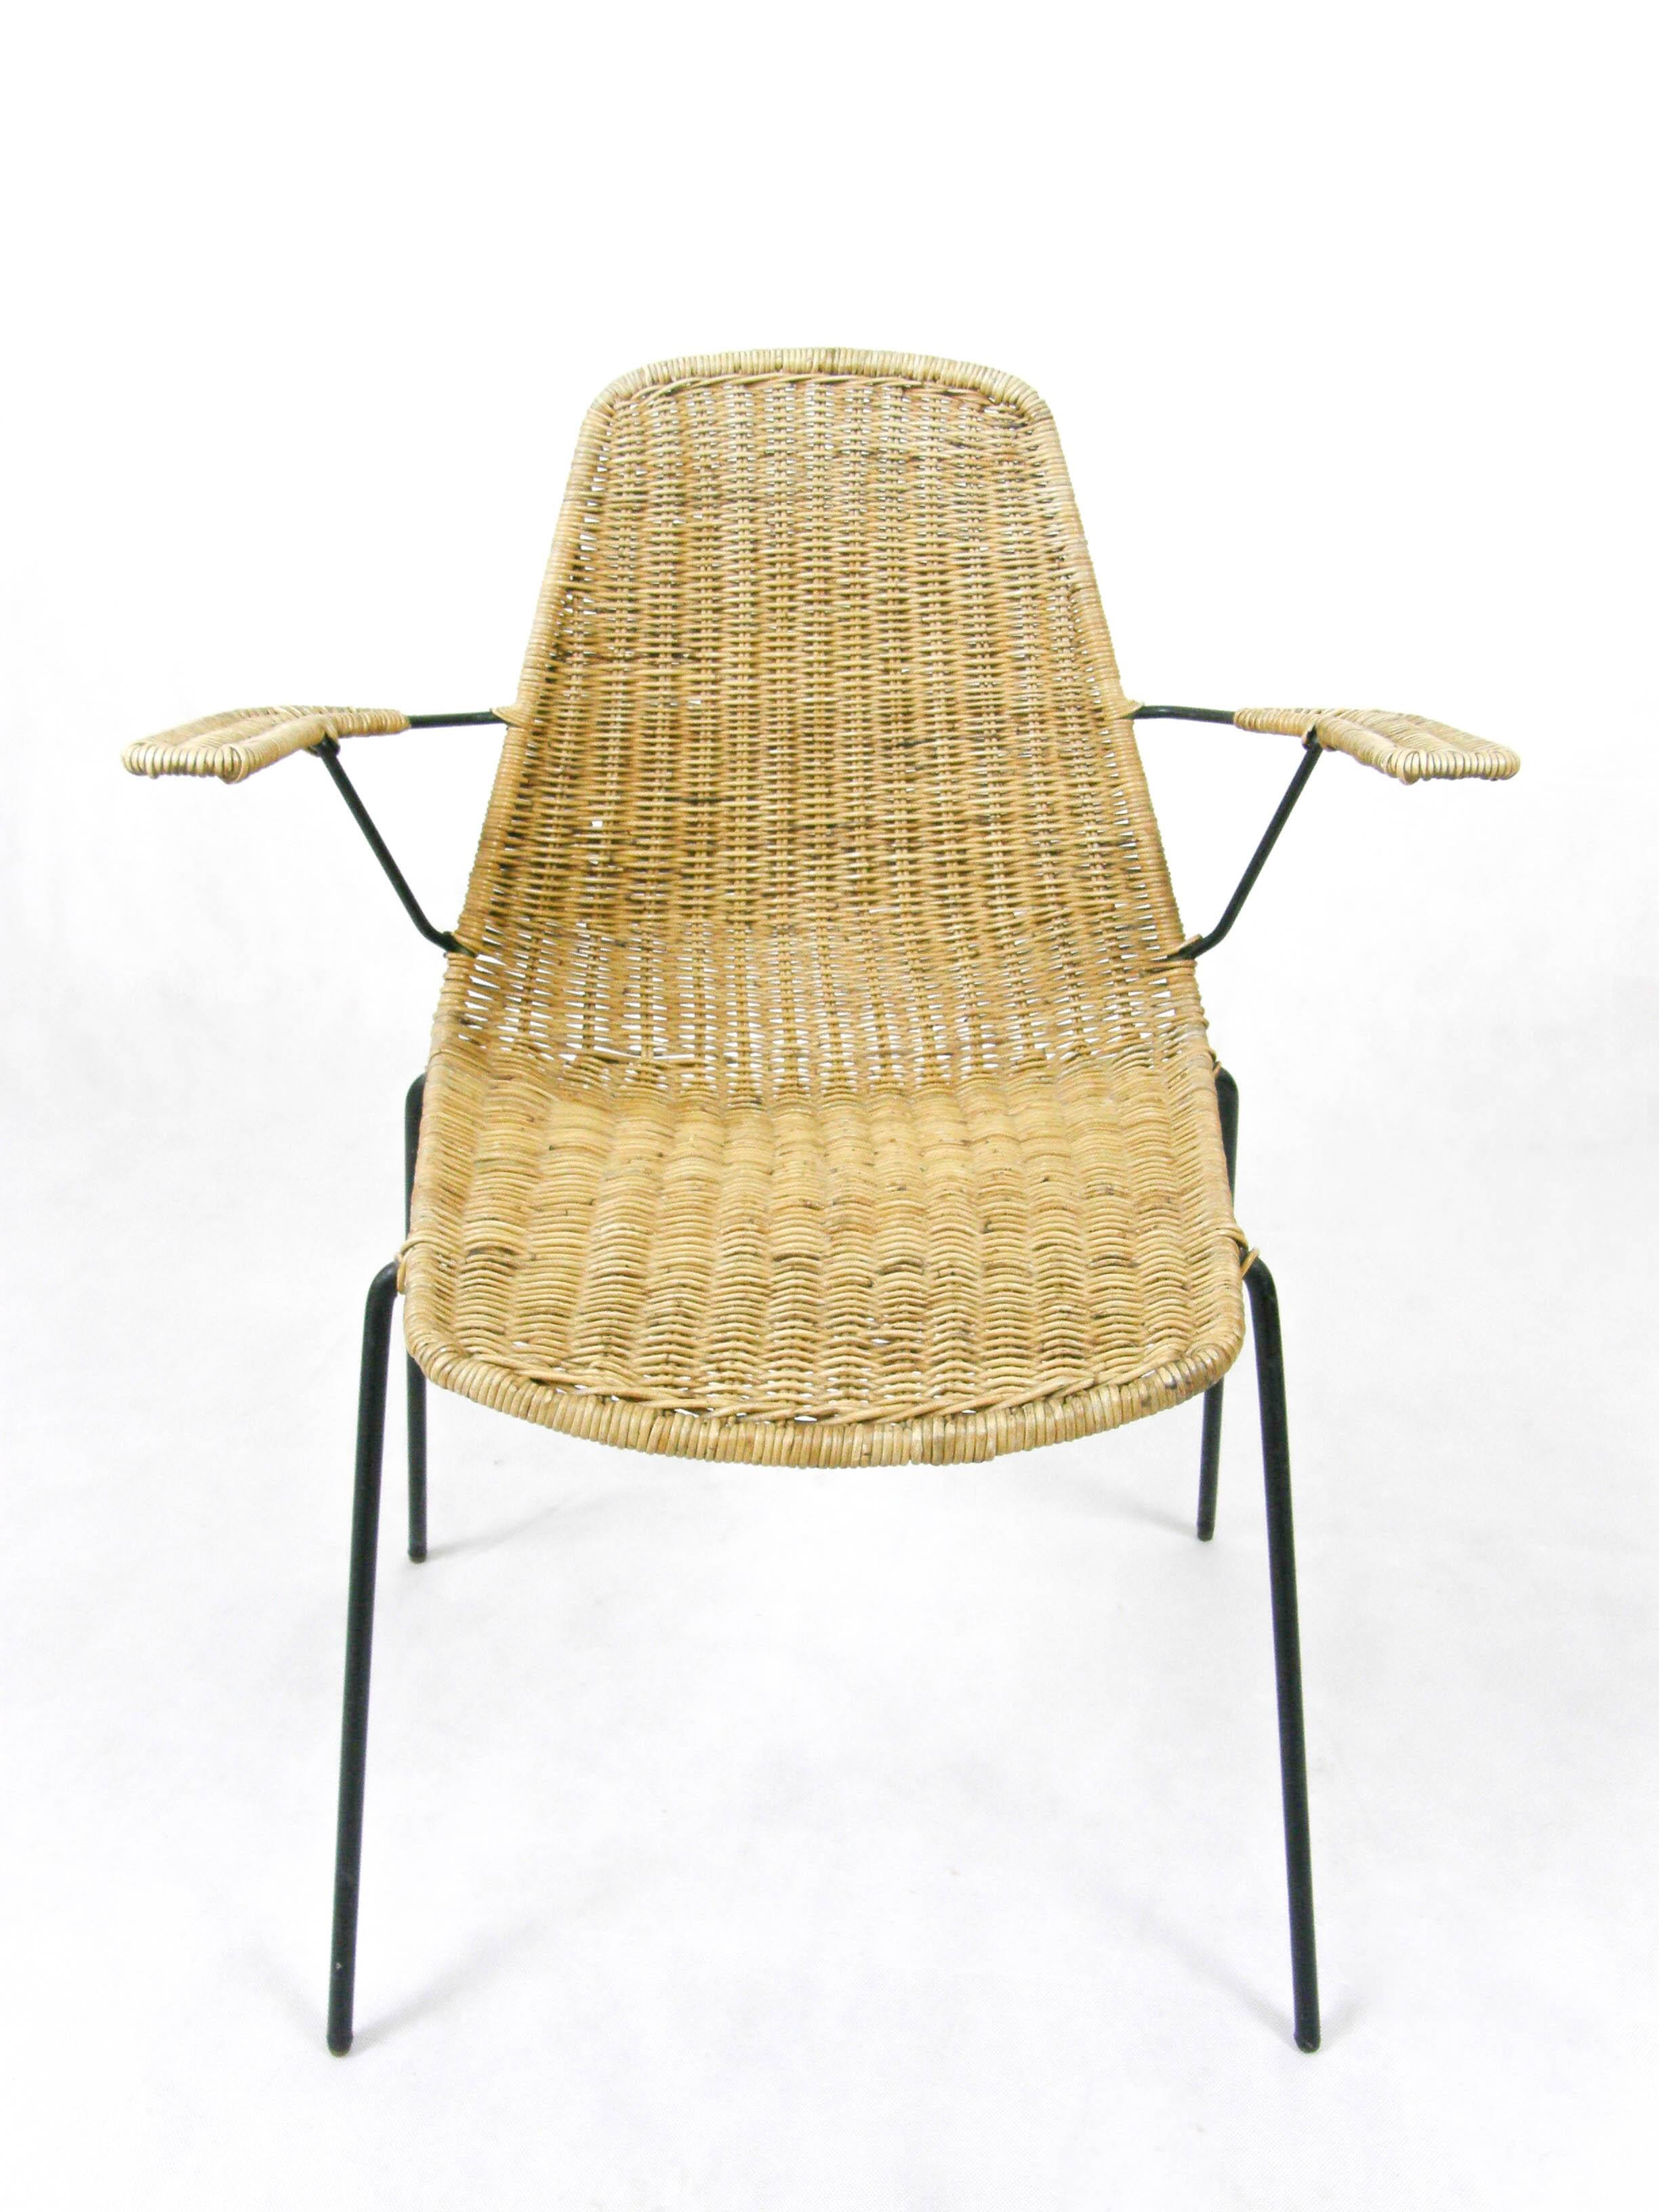 Mid-20th Century Wicker chair with armrests Campo and Graffi italia 1950s For Sale